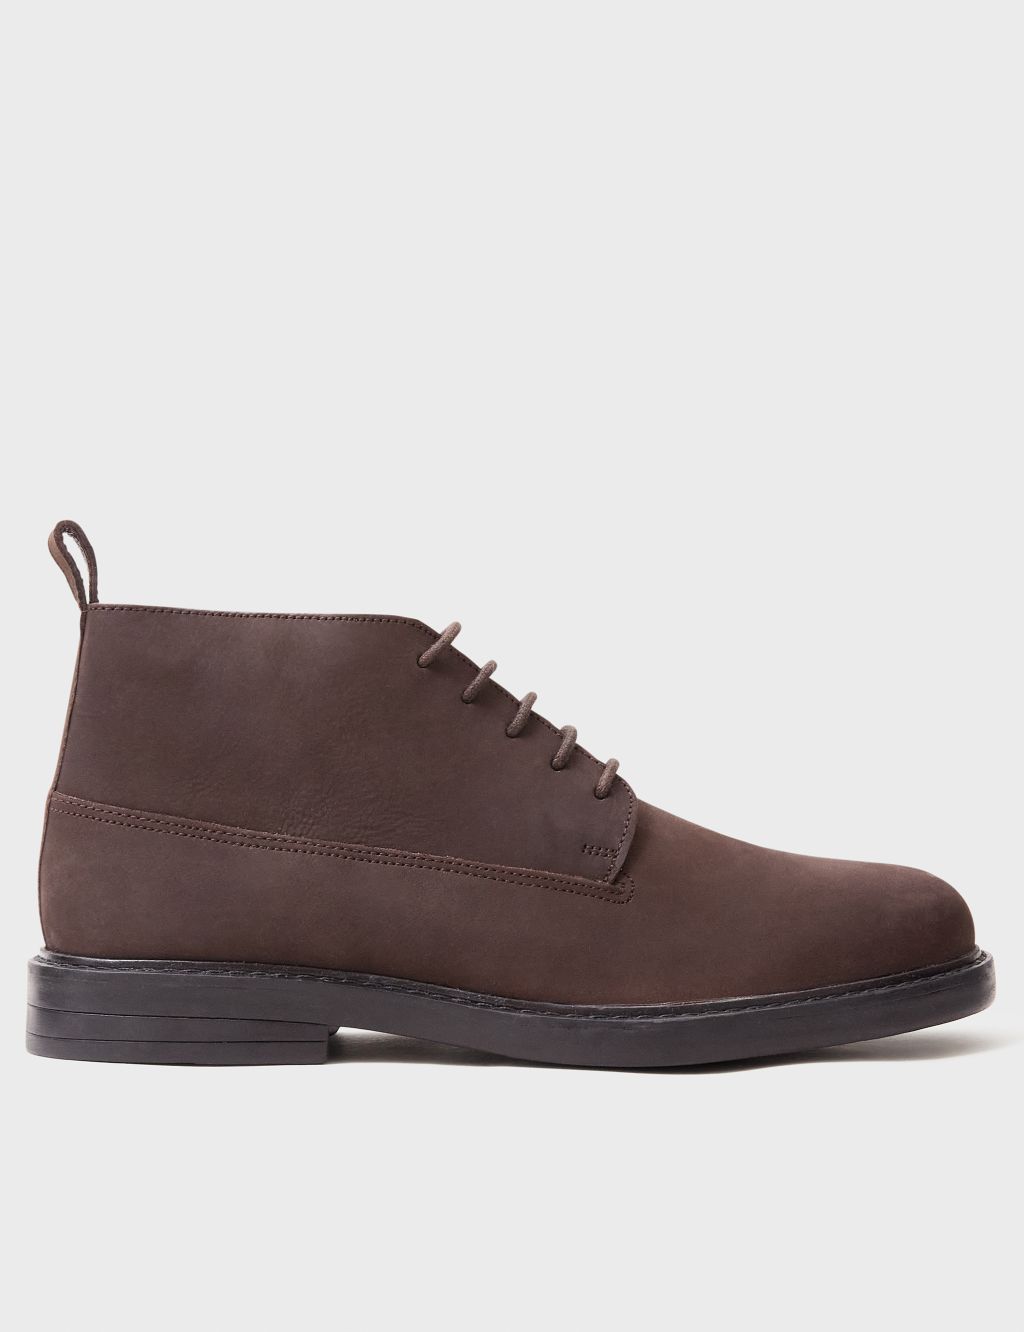 Leather Desert Boots | Crew Clothing | M&S